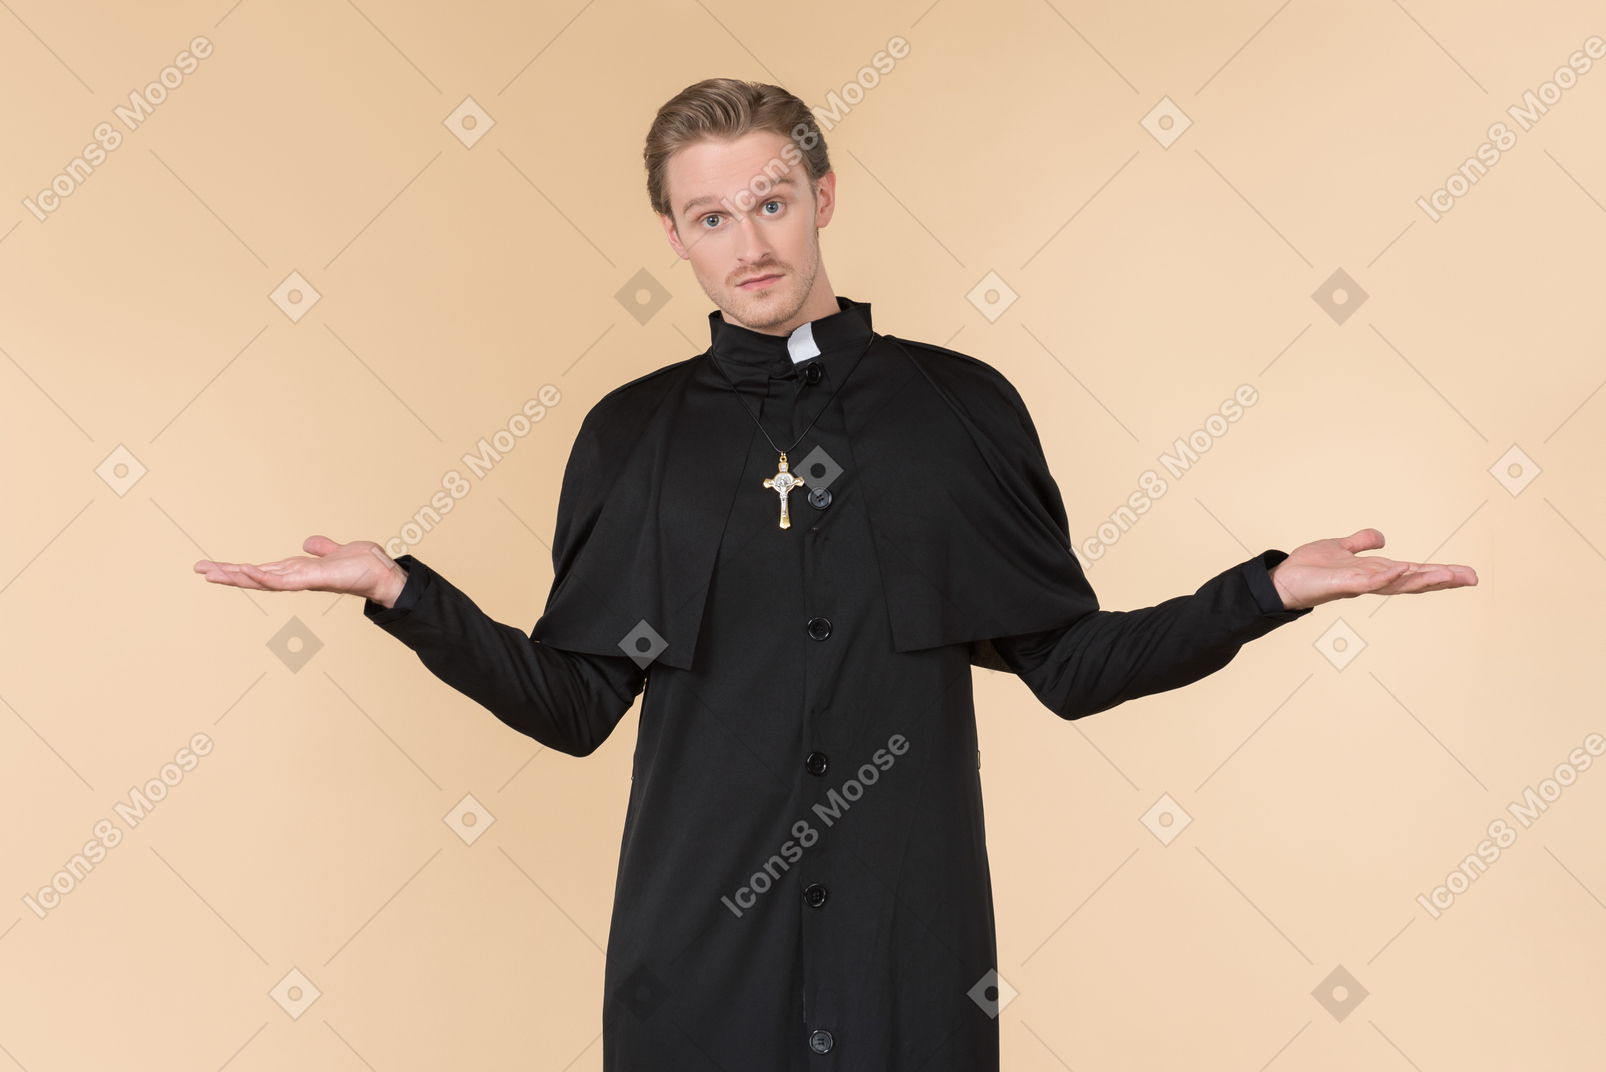 Catholic priest standing with hands aside